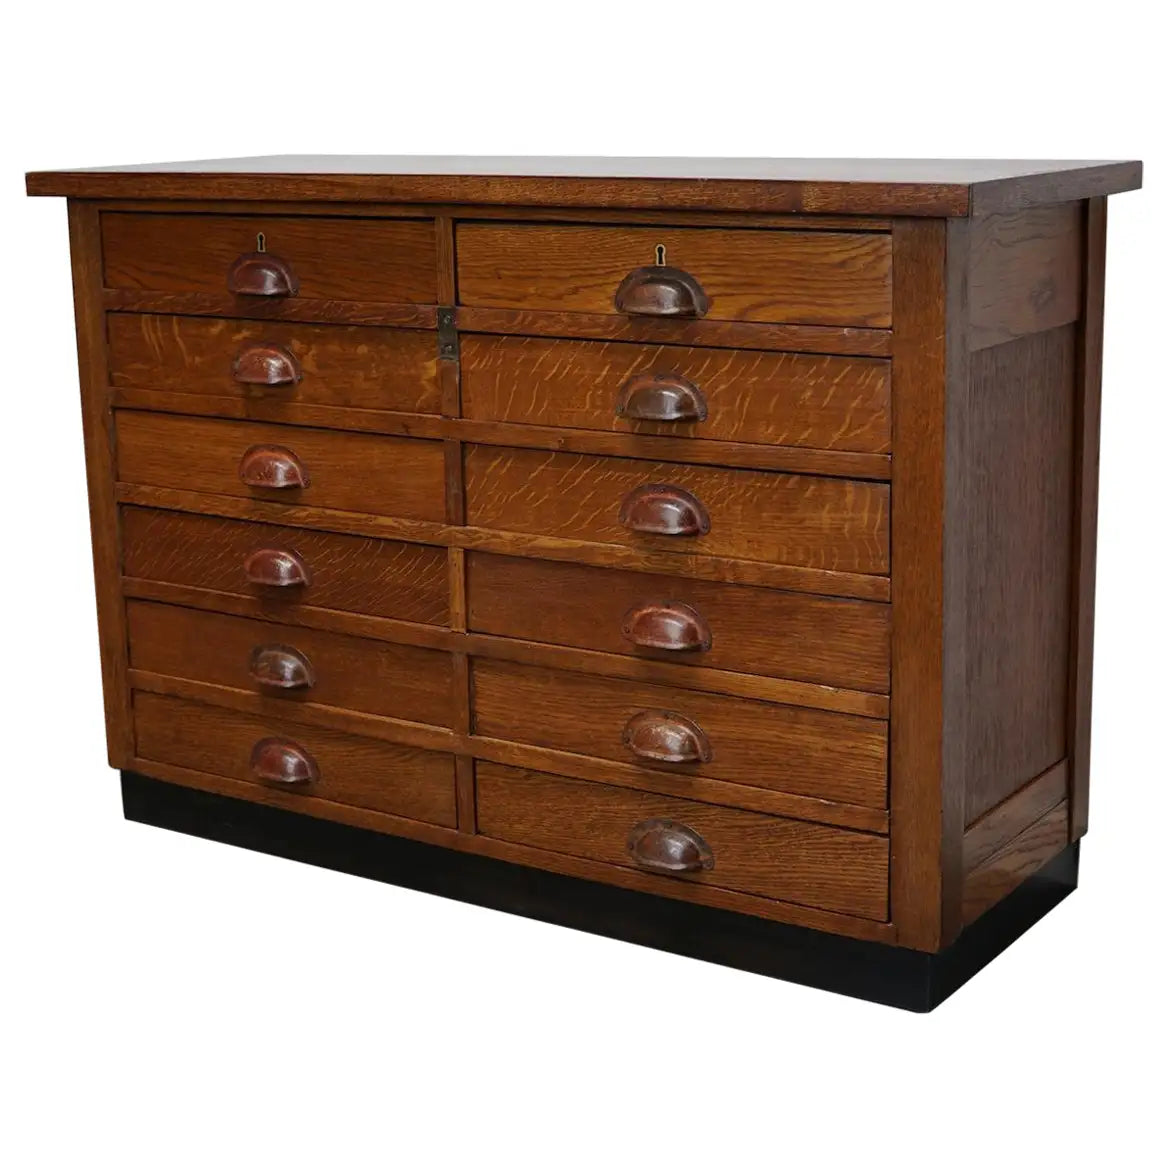 Dutch Industrial Oak Apothecary Cabinet, Mid-20th Century